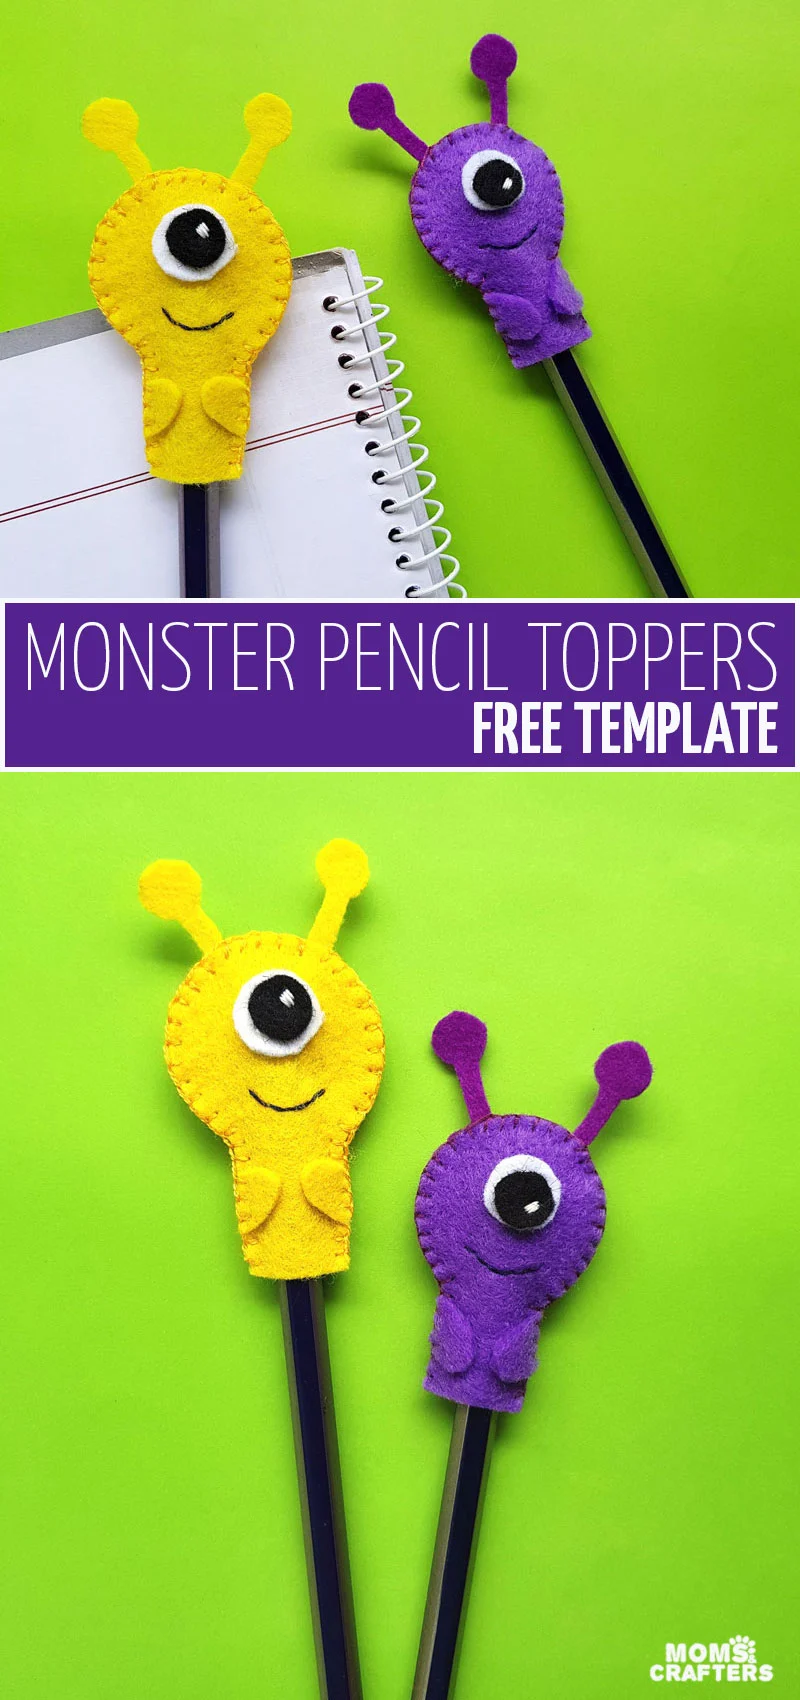 Craft some DIY school supplies with this monster pencil toppers craft! These fun back to school crafts for teens, tweens, and big kids are super fun adn great for Halloween or monster party favors too.